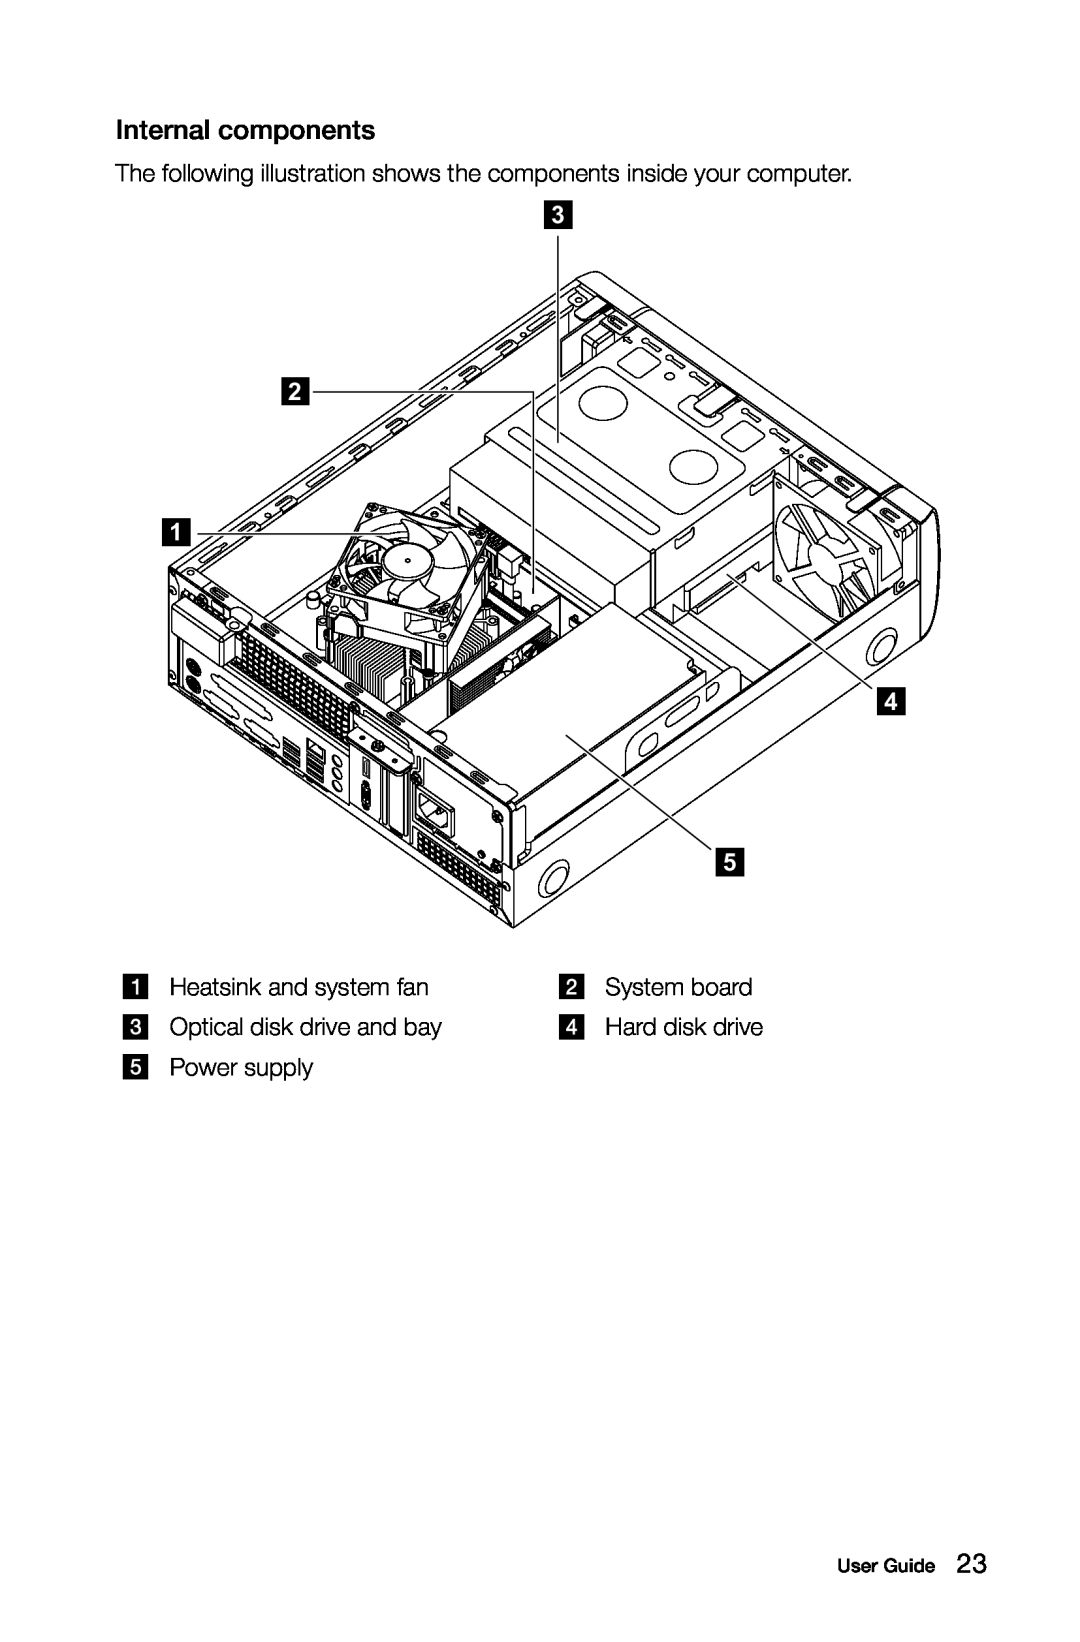 Lenovo H5S manual Internal components, 3 2, Heatsink and system fan, System board, Optical disk drive and bay, Power supply 